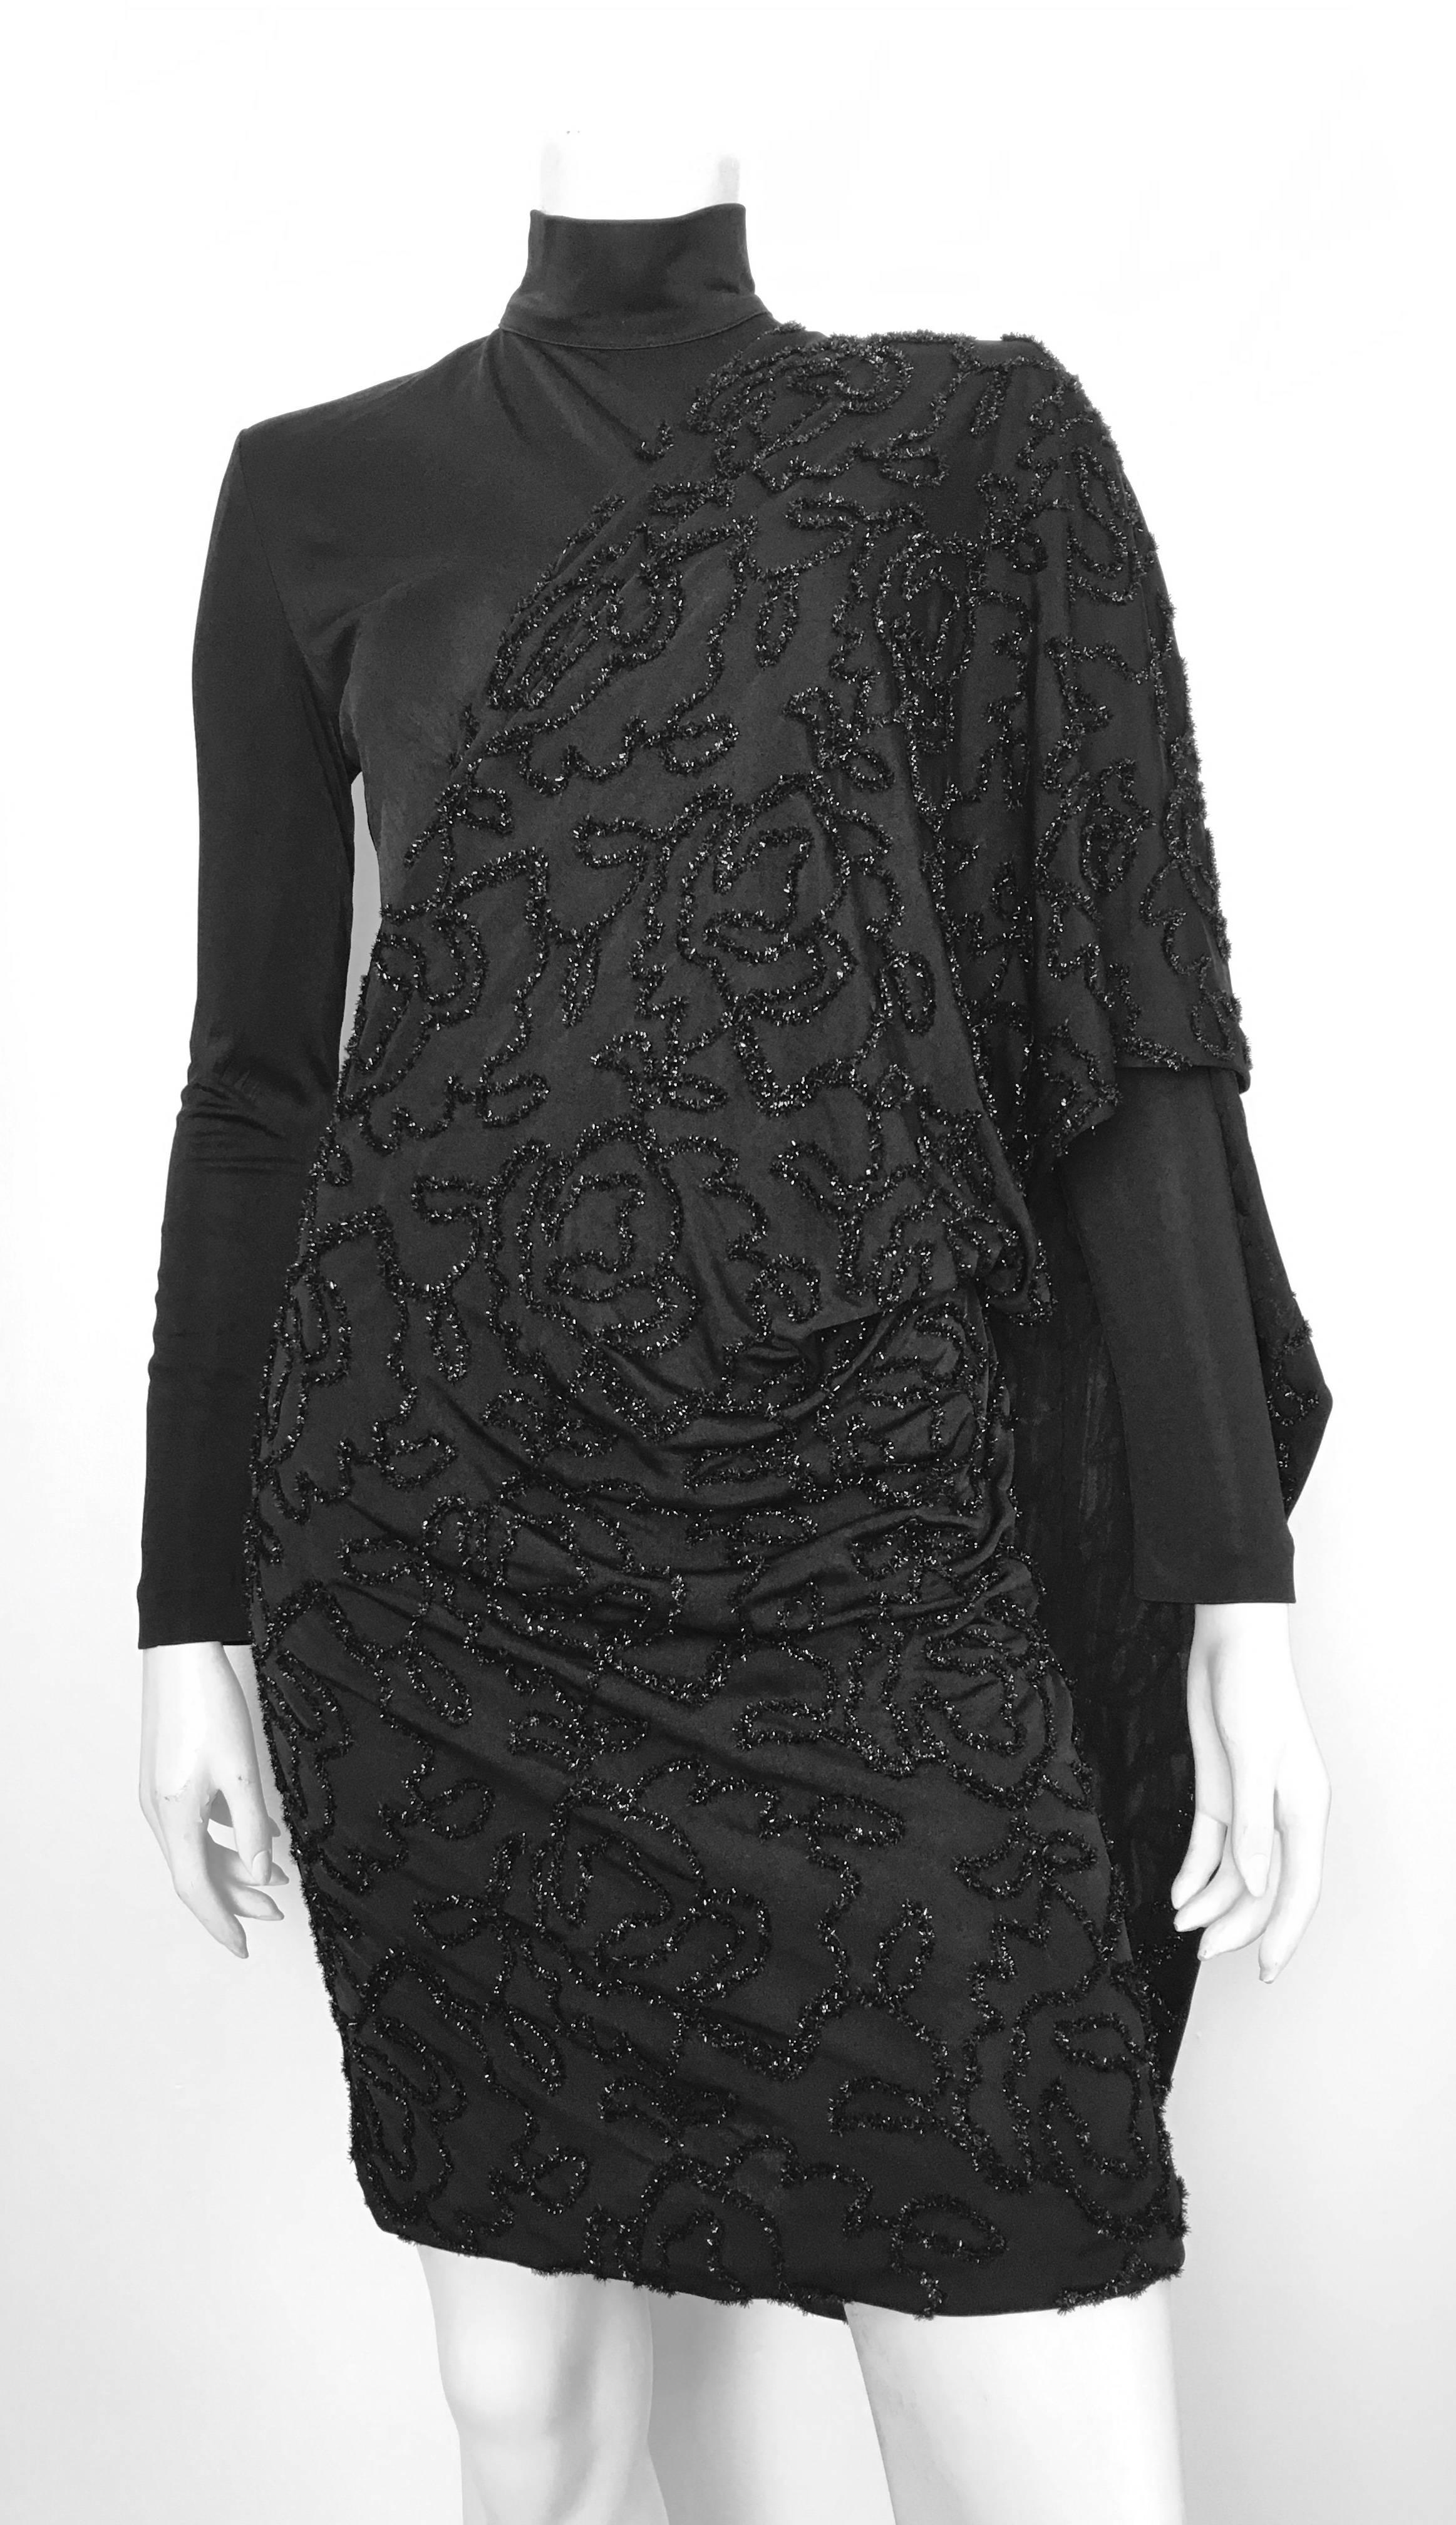 Patrick Kelly 1980s black long sleeves & turtleneck cocktail evening dress is labeled a size 10 but fits like a modern size 4 /6.  This dress is on Matilda the Mannequin and she is a size 4. There is some stretch to it due to the nylon & acetate